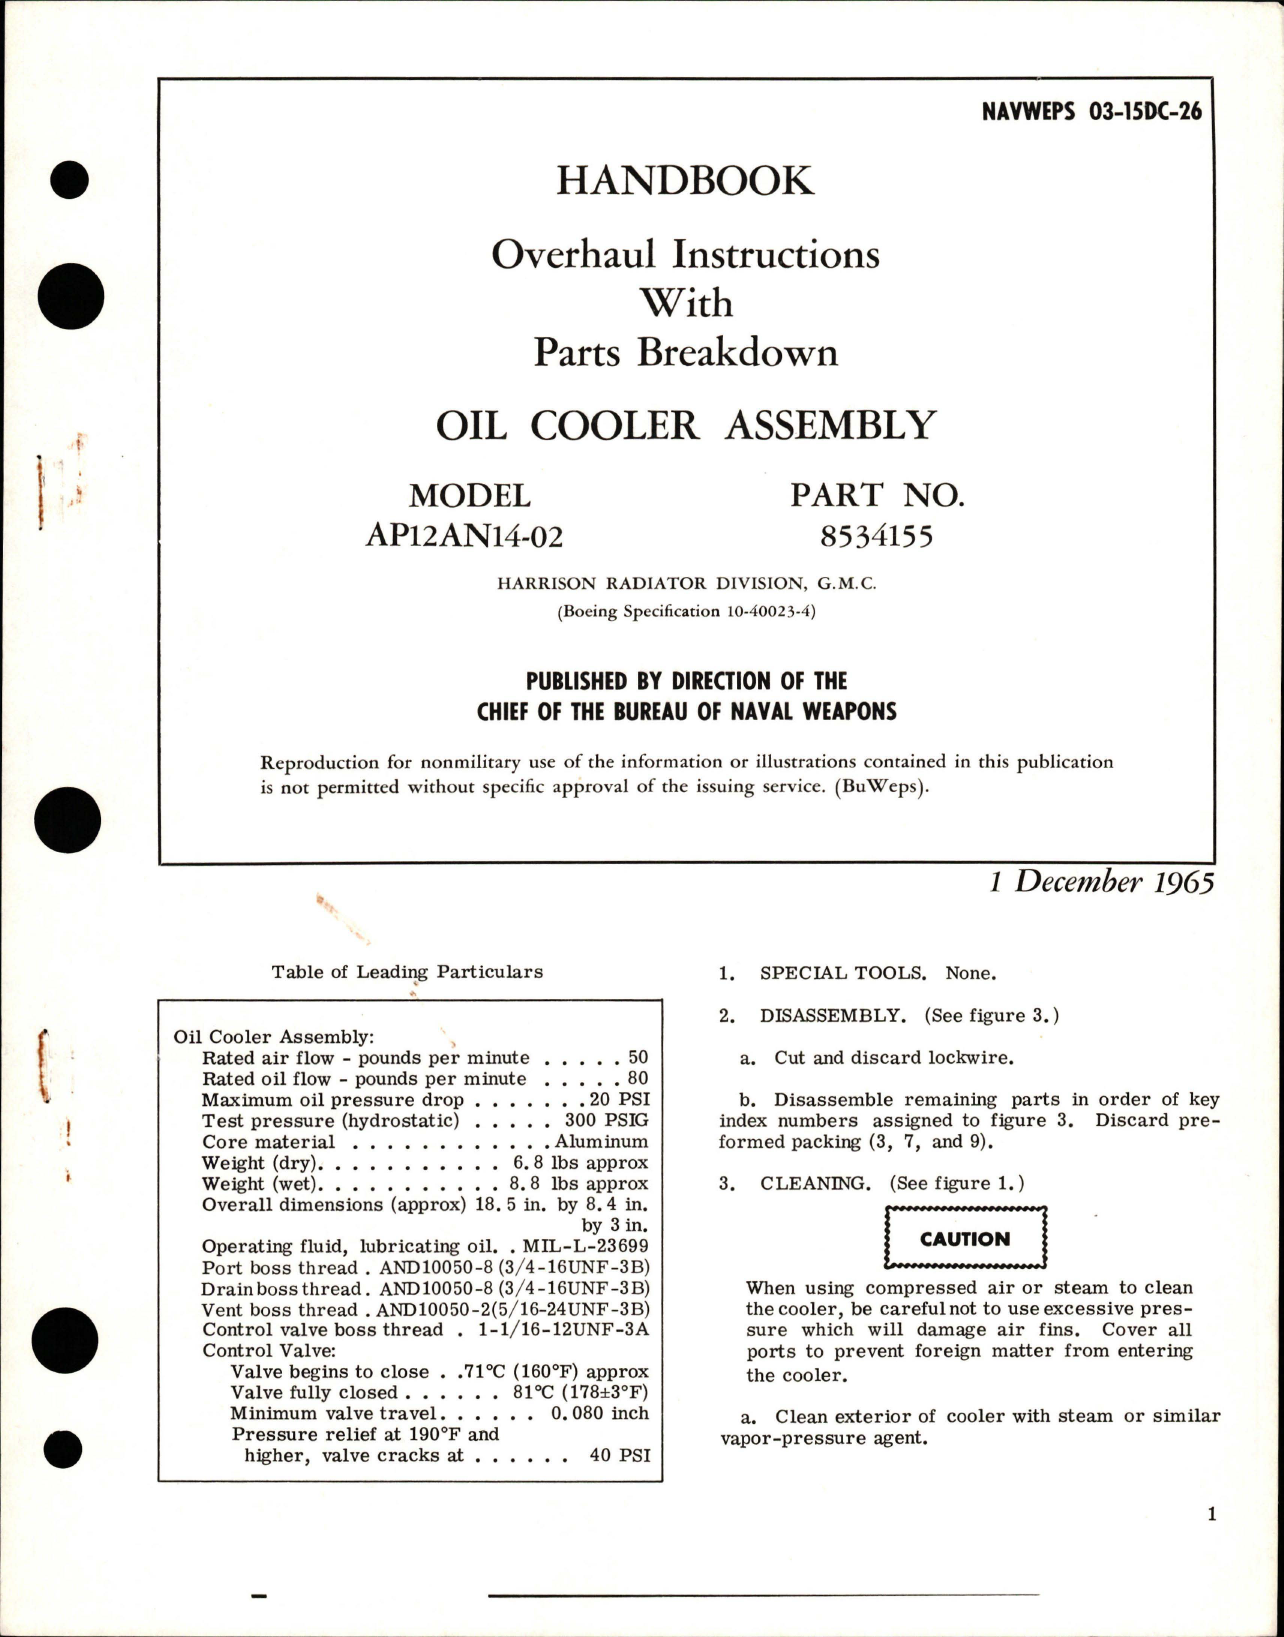 Sample page 1 from AirCorps Library document: Overhaul Instructions with Parts Breakdown for Oil Cooler Assembly - Model AP12AN14-02 - Part 8534155